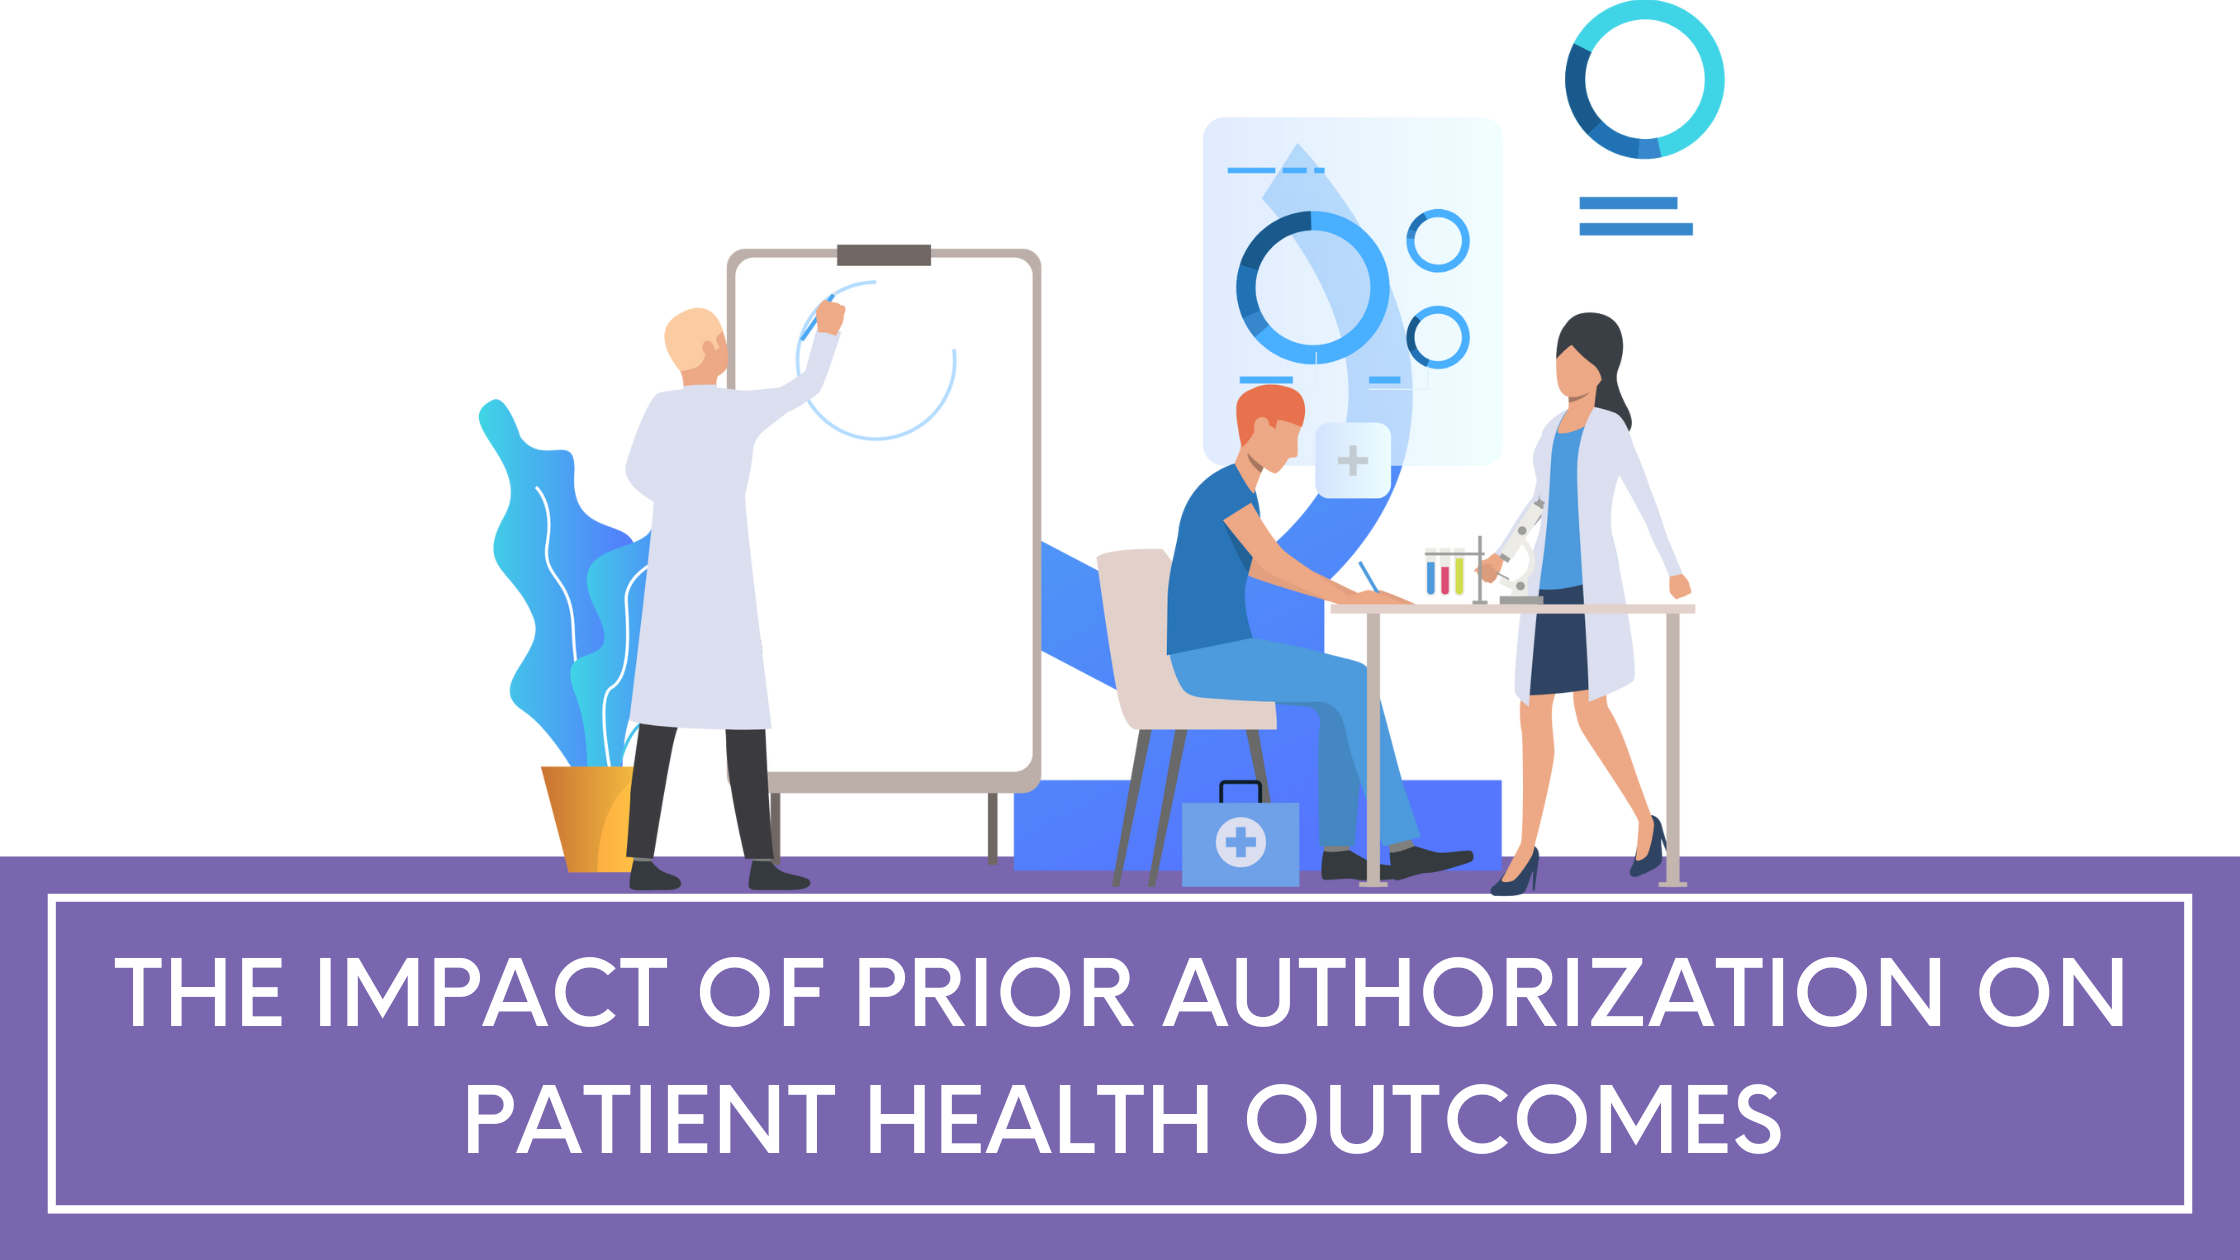 Prior Authorization on Patient Health Outcomes